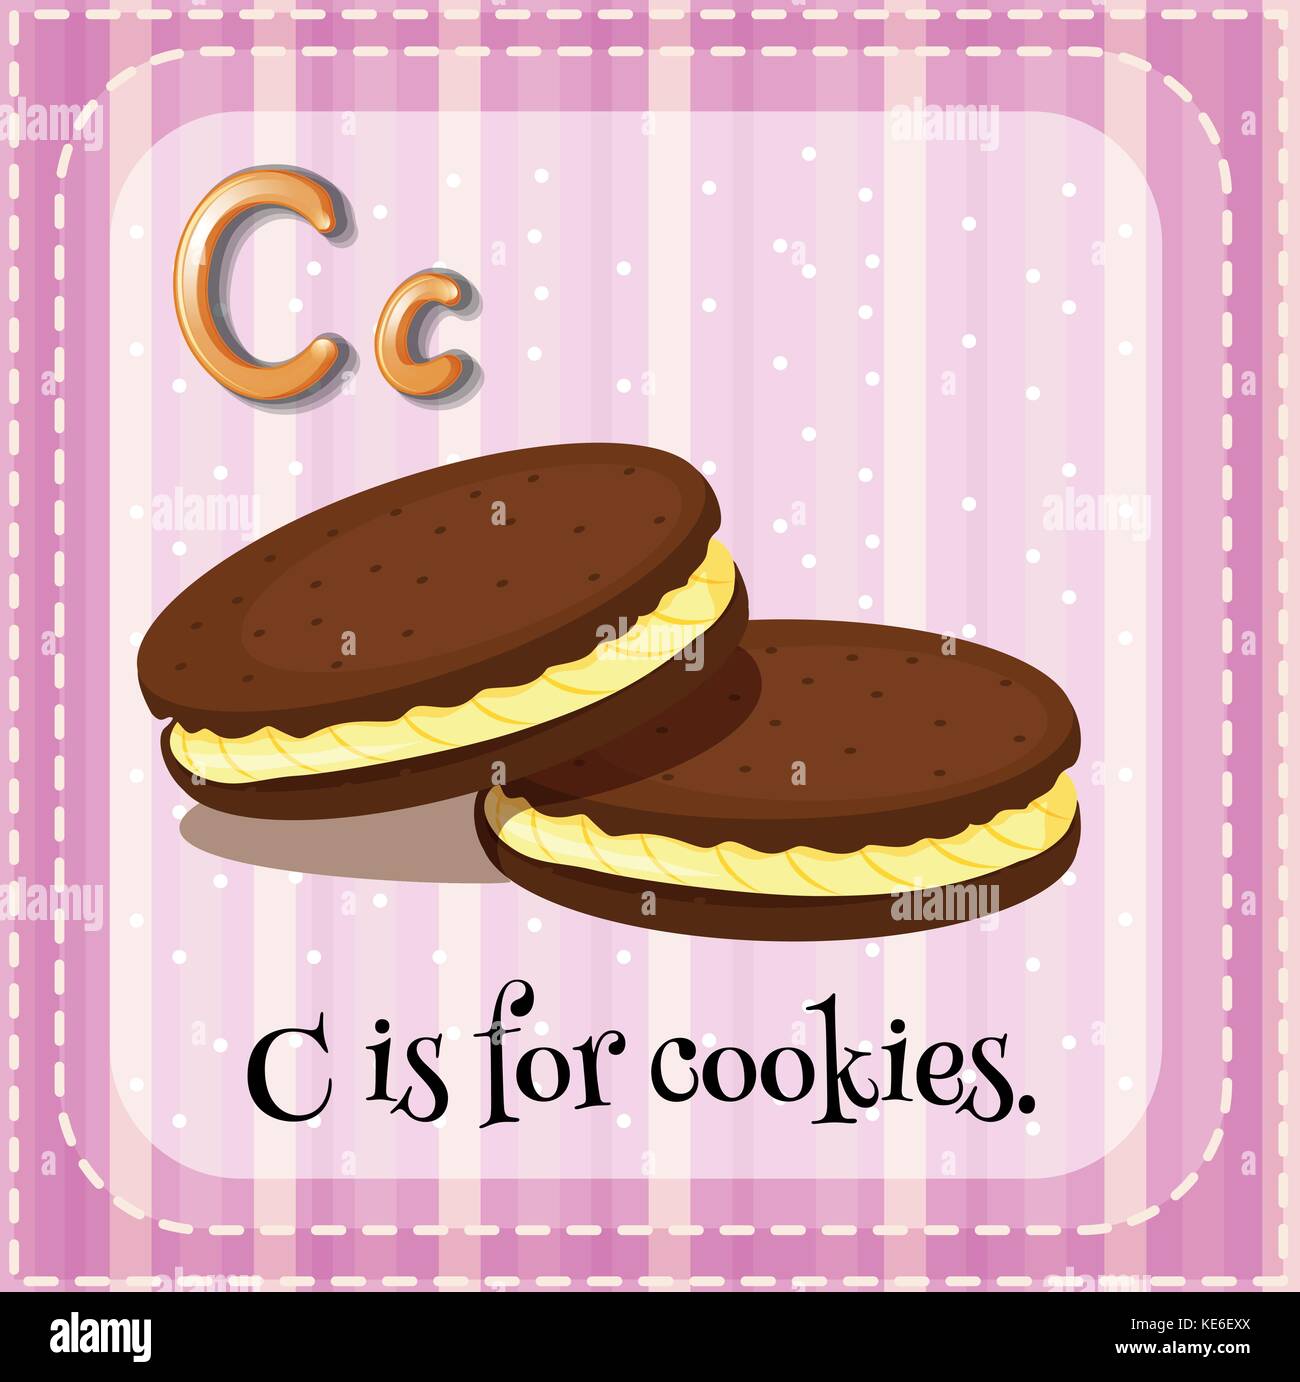 Flashcard Letter C Is For Cookies Illustration Stock Vector Image Art Alamy